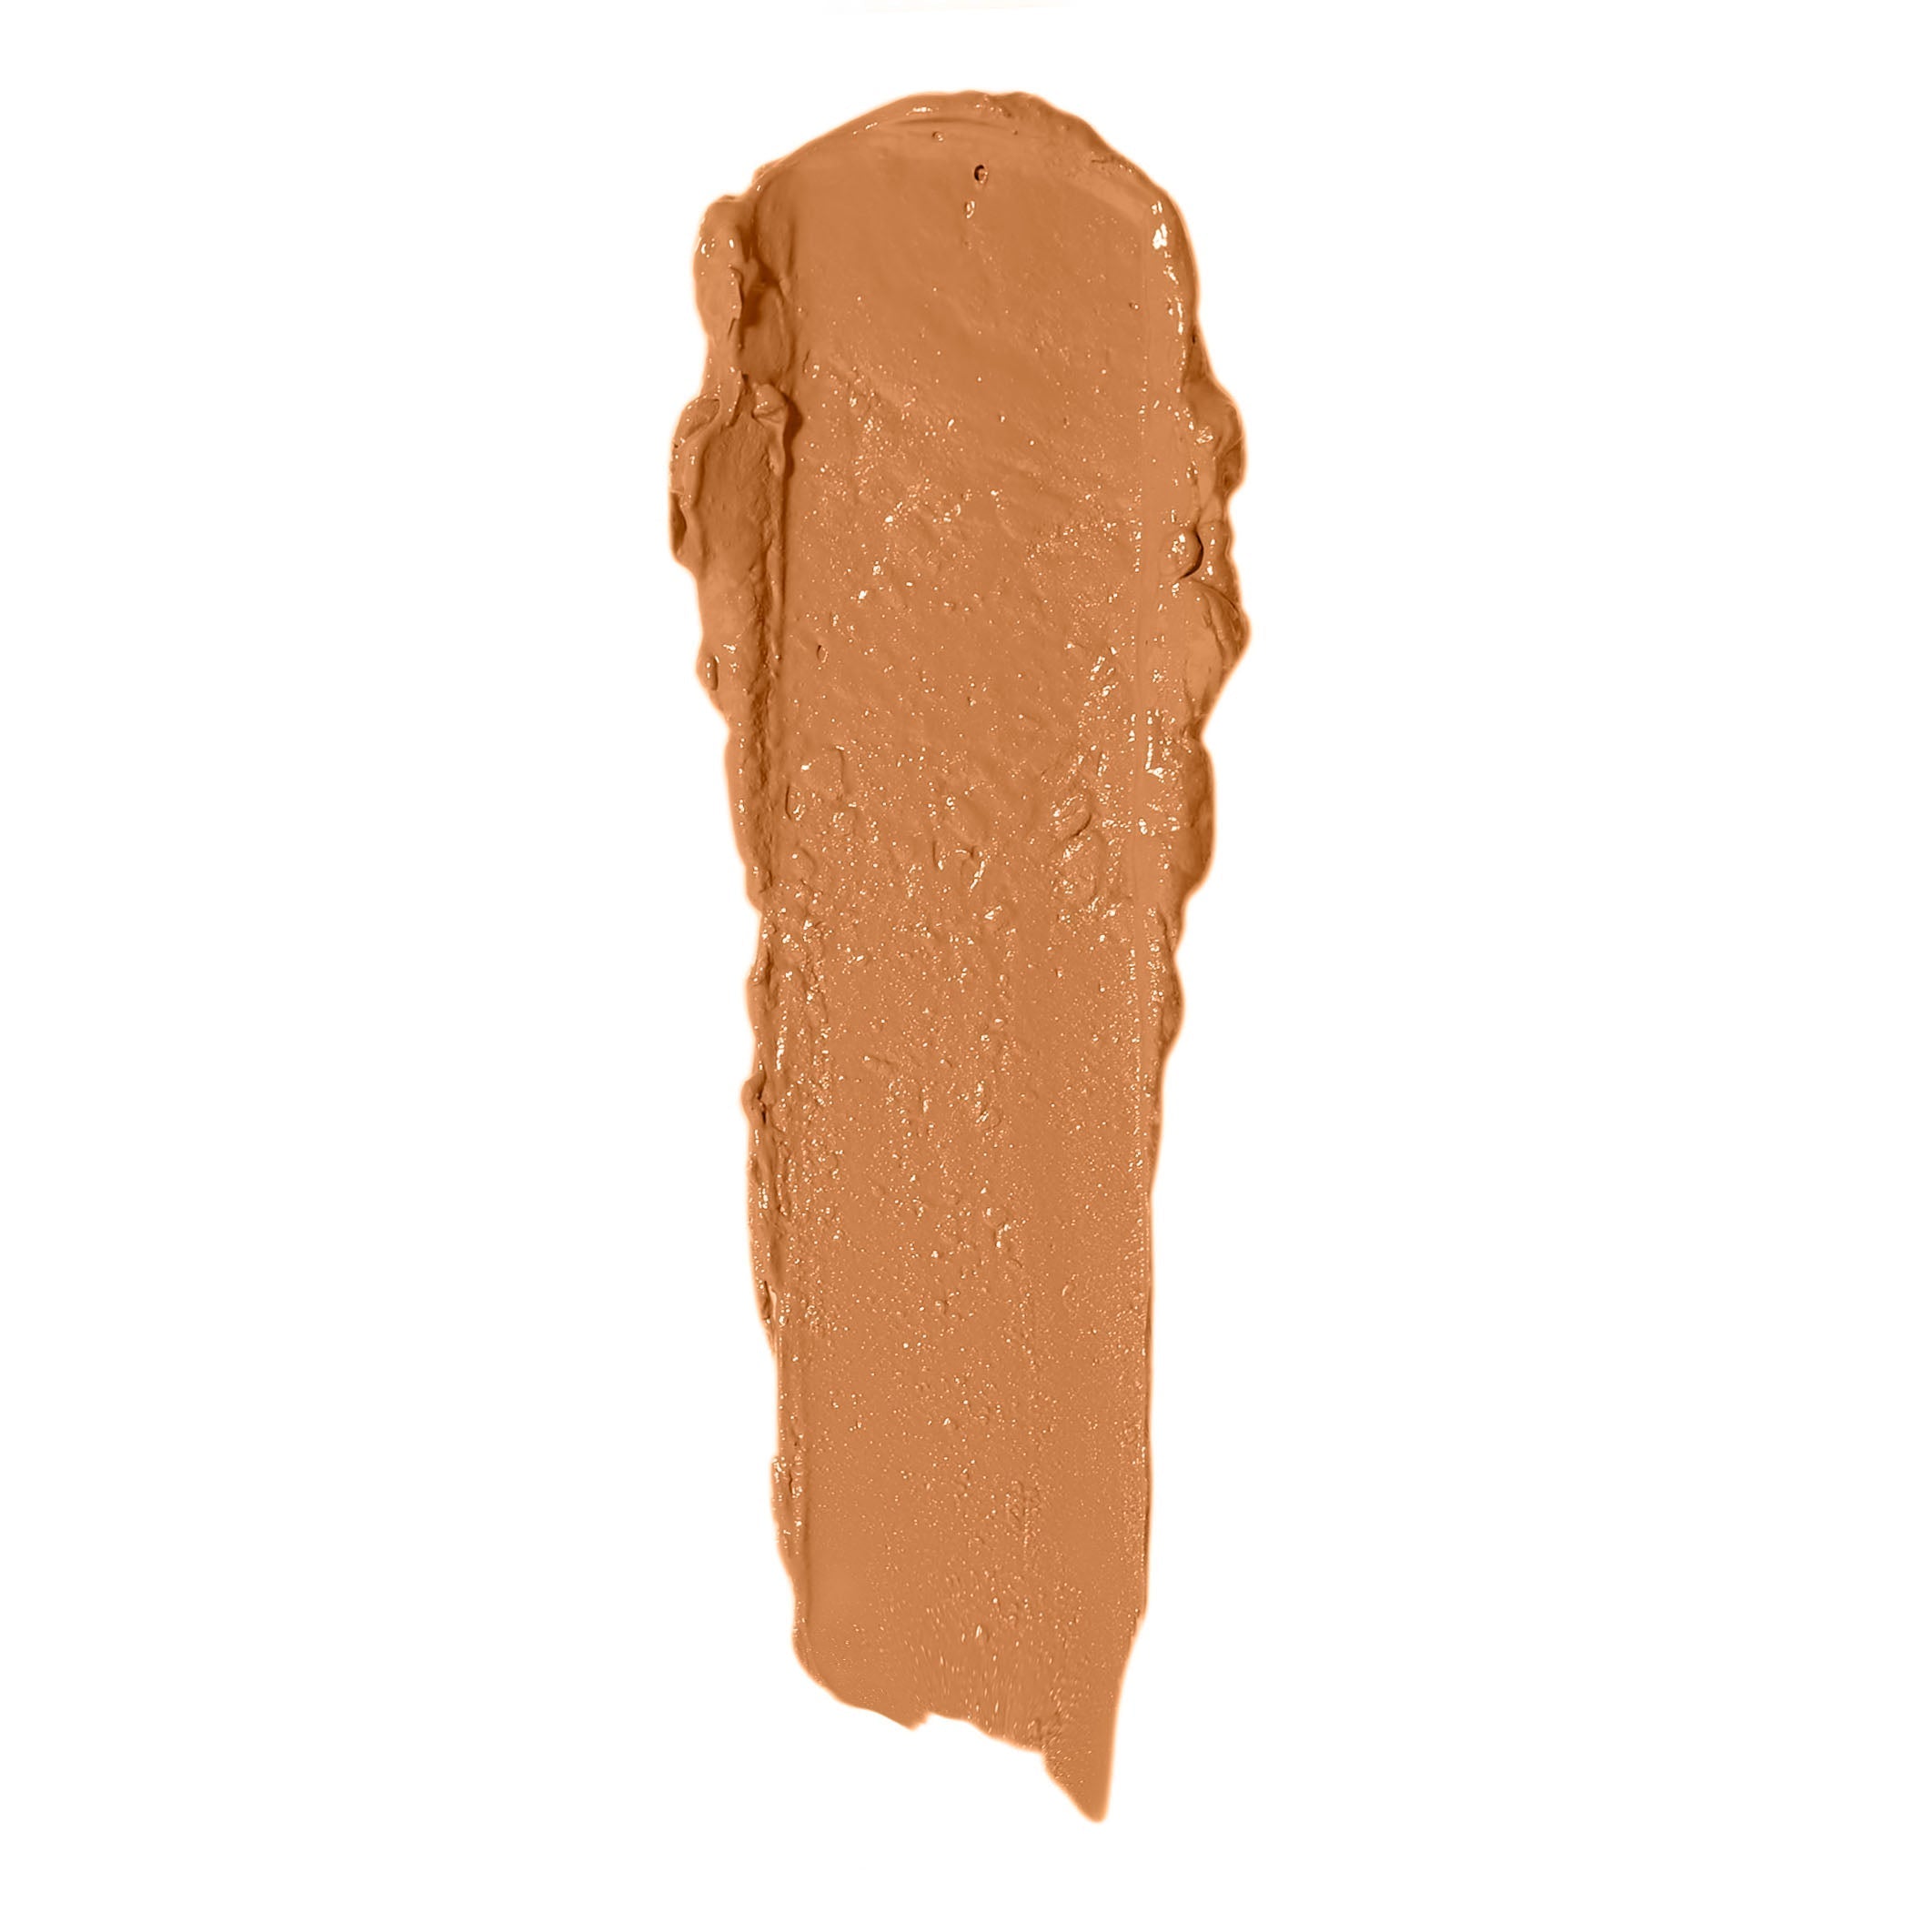 Blunder Cover an All-In-One Foundation/Concealer Shade - Fünf.5 - 1